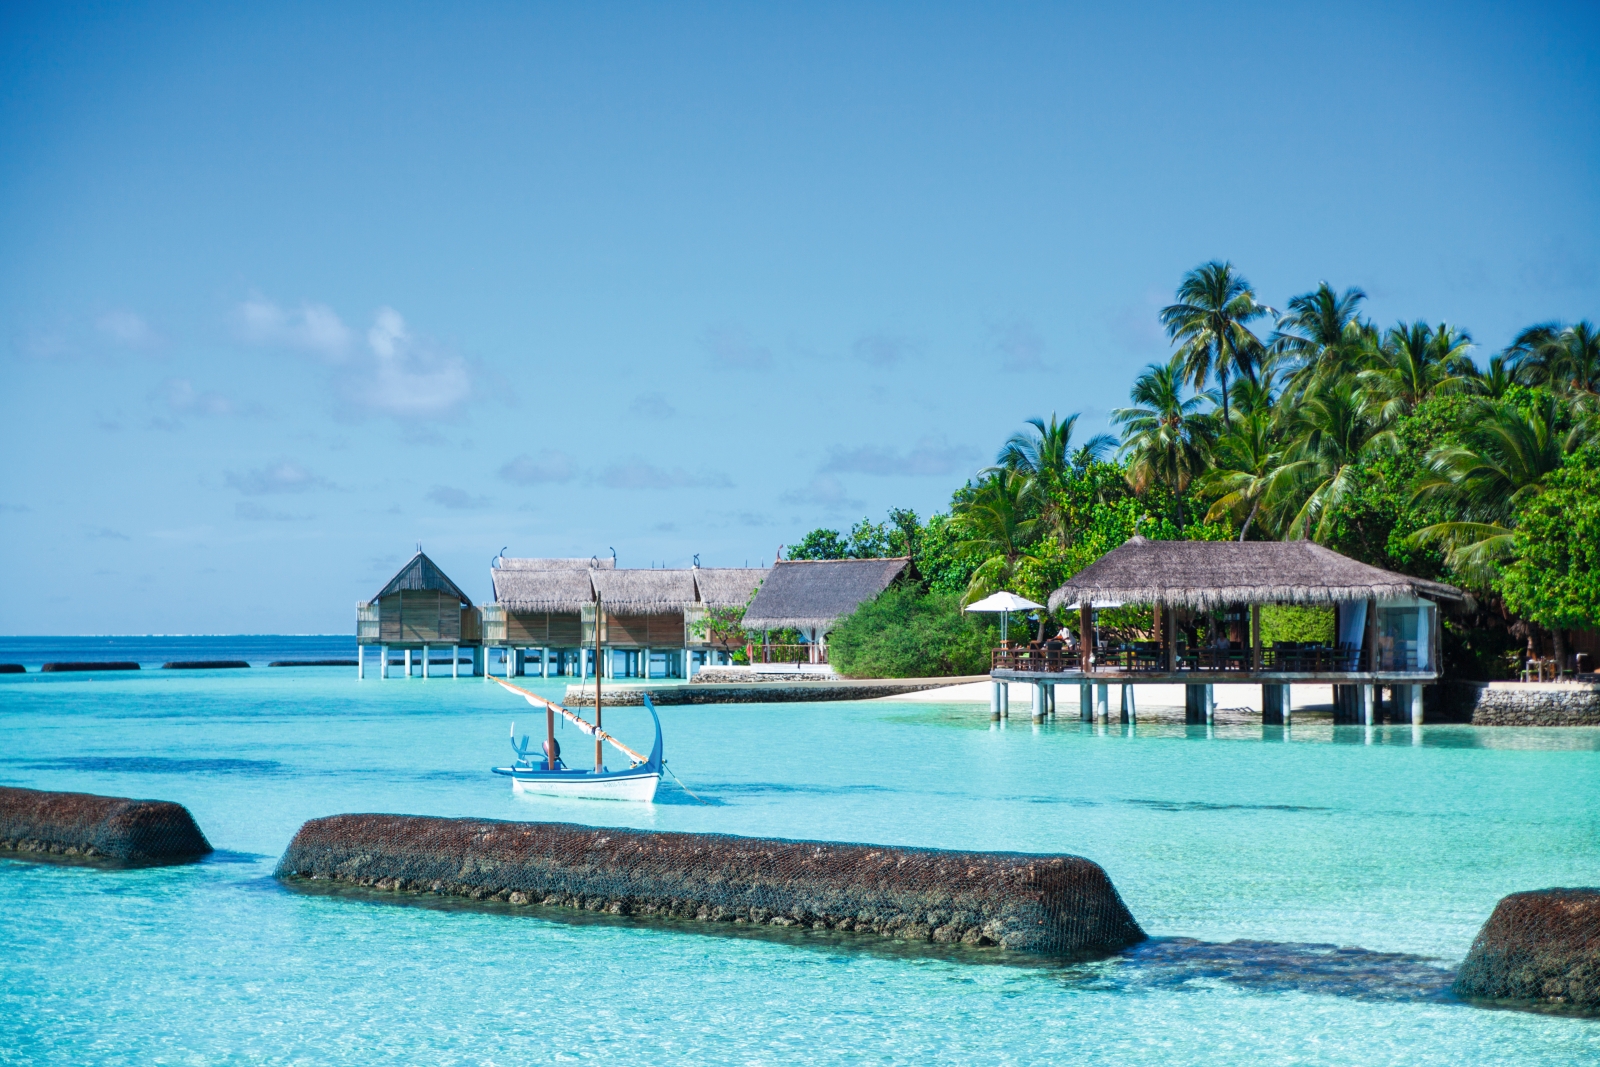 Seaside bar at luxury resort Constance Moofushi in the Maldives seen from the turquoise waters of the Indian Ocean